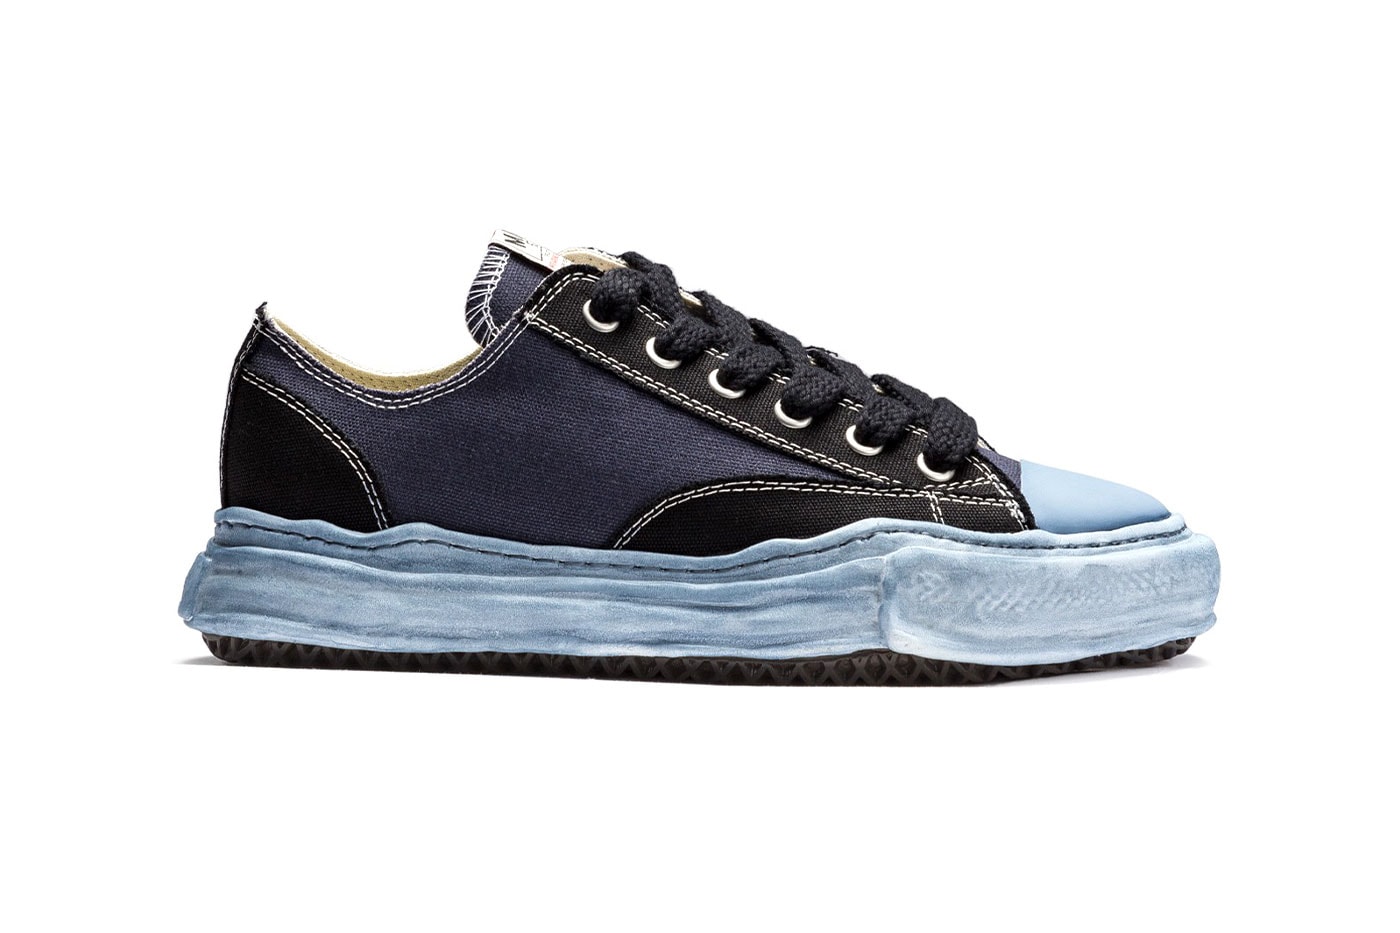 Maison Mihara Yasuhiro Low Top Sneakers New Colorways HBX Release Info Buy Price Blue Black Green White OG Soles